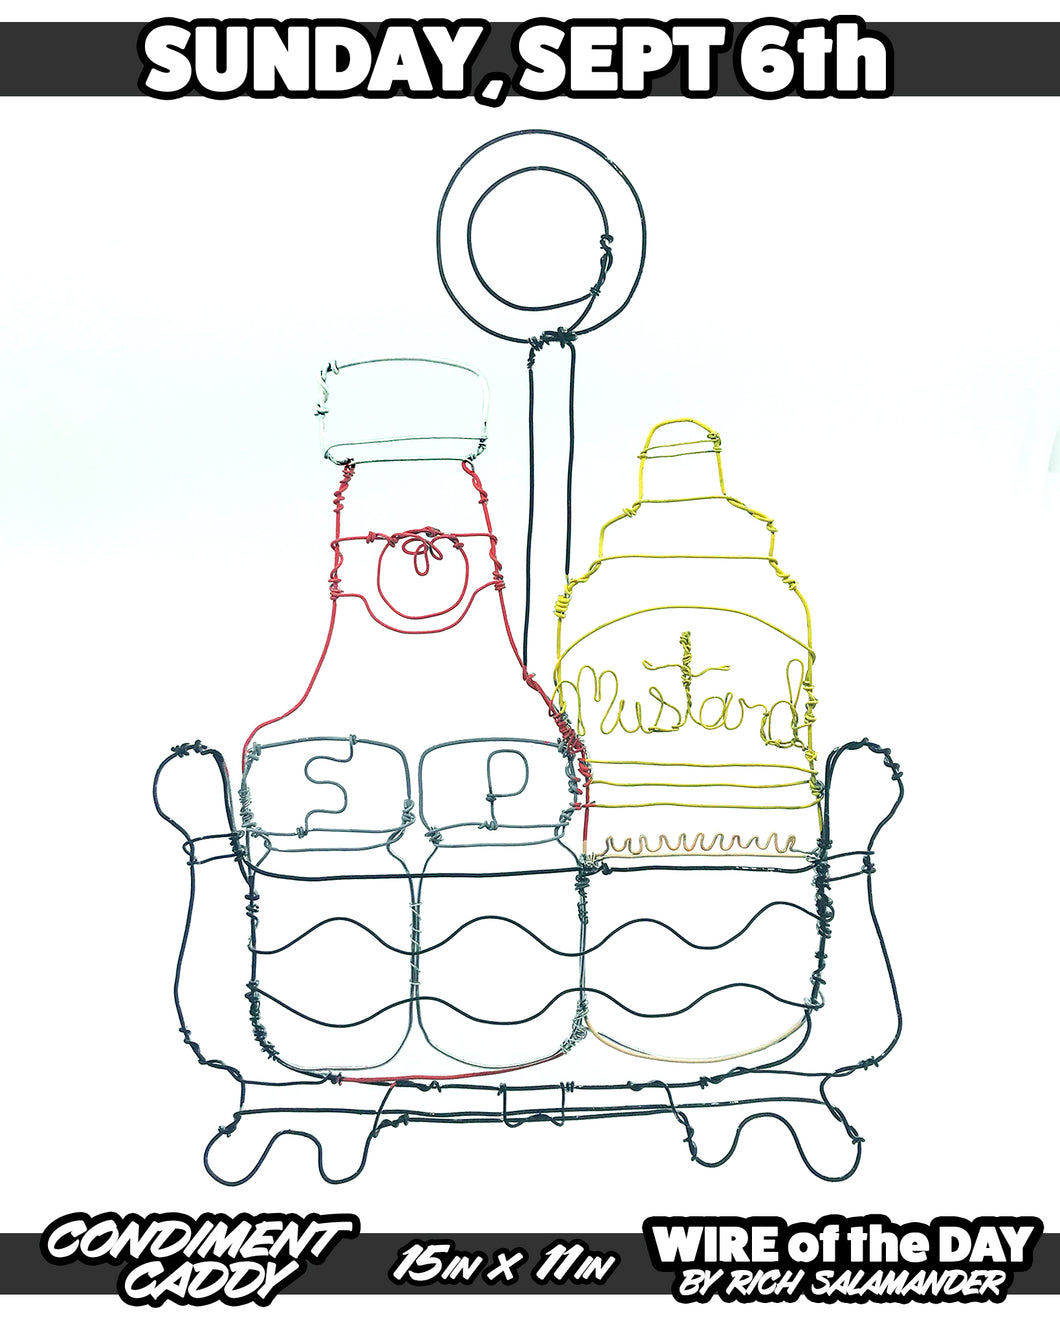 WIRE of the DAY CONDIMENT CADDY